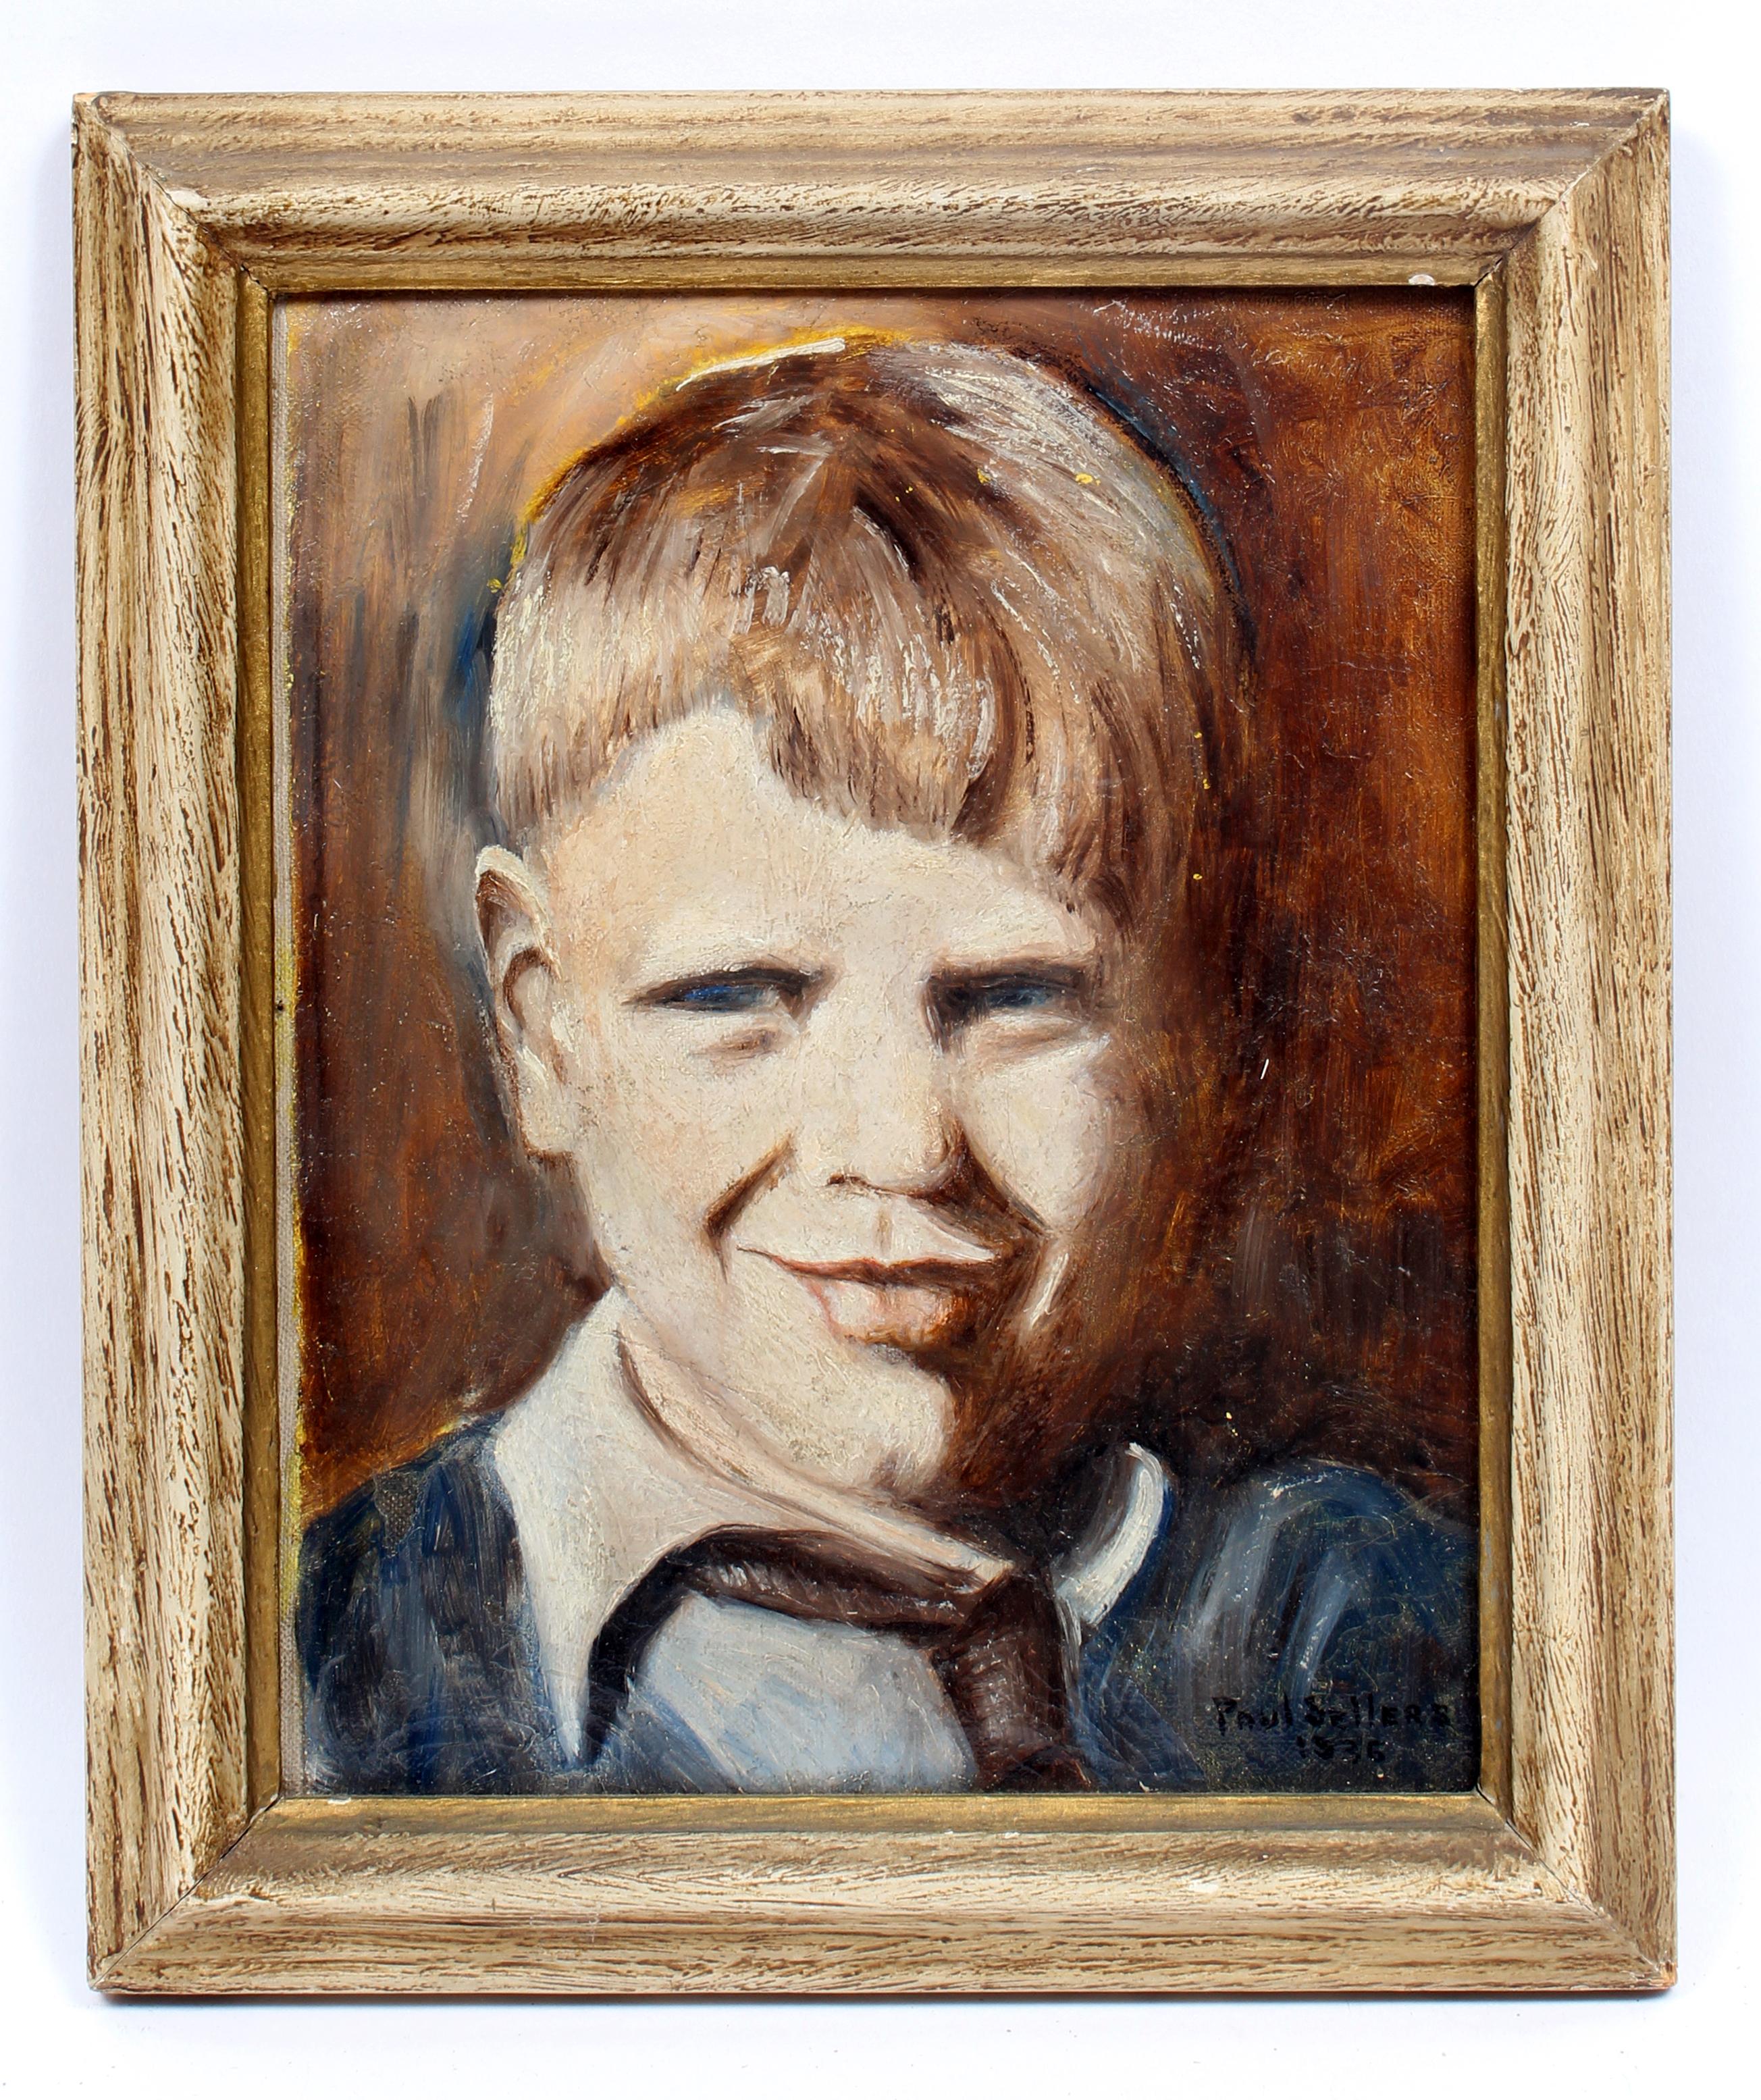 America impressionist portrait young boy 1937 Modern Figurative Oil Painting